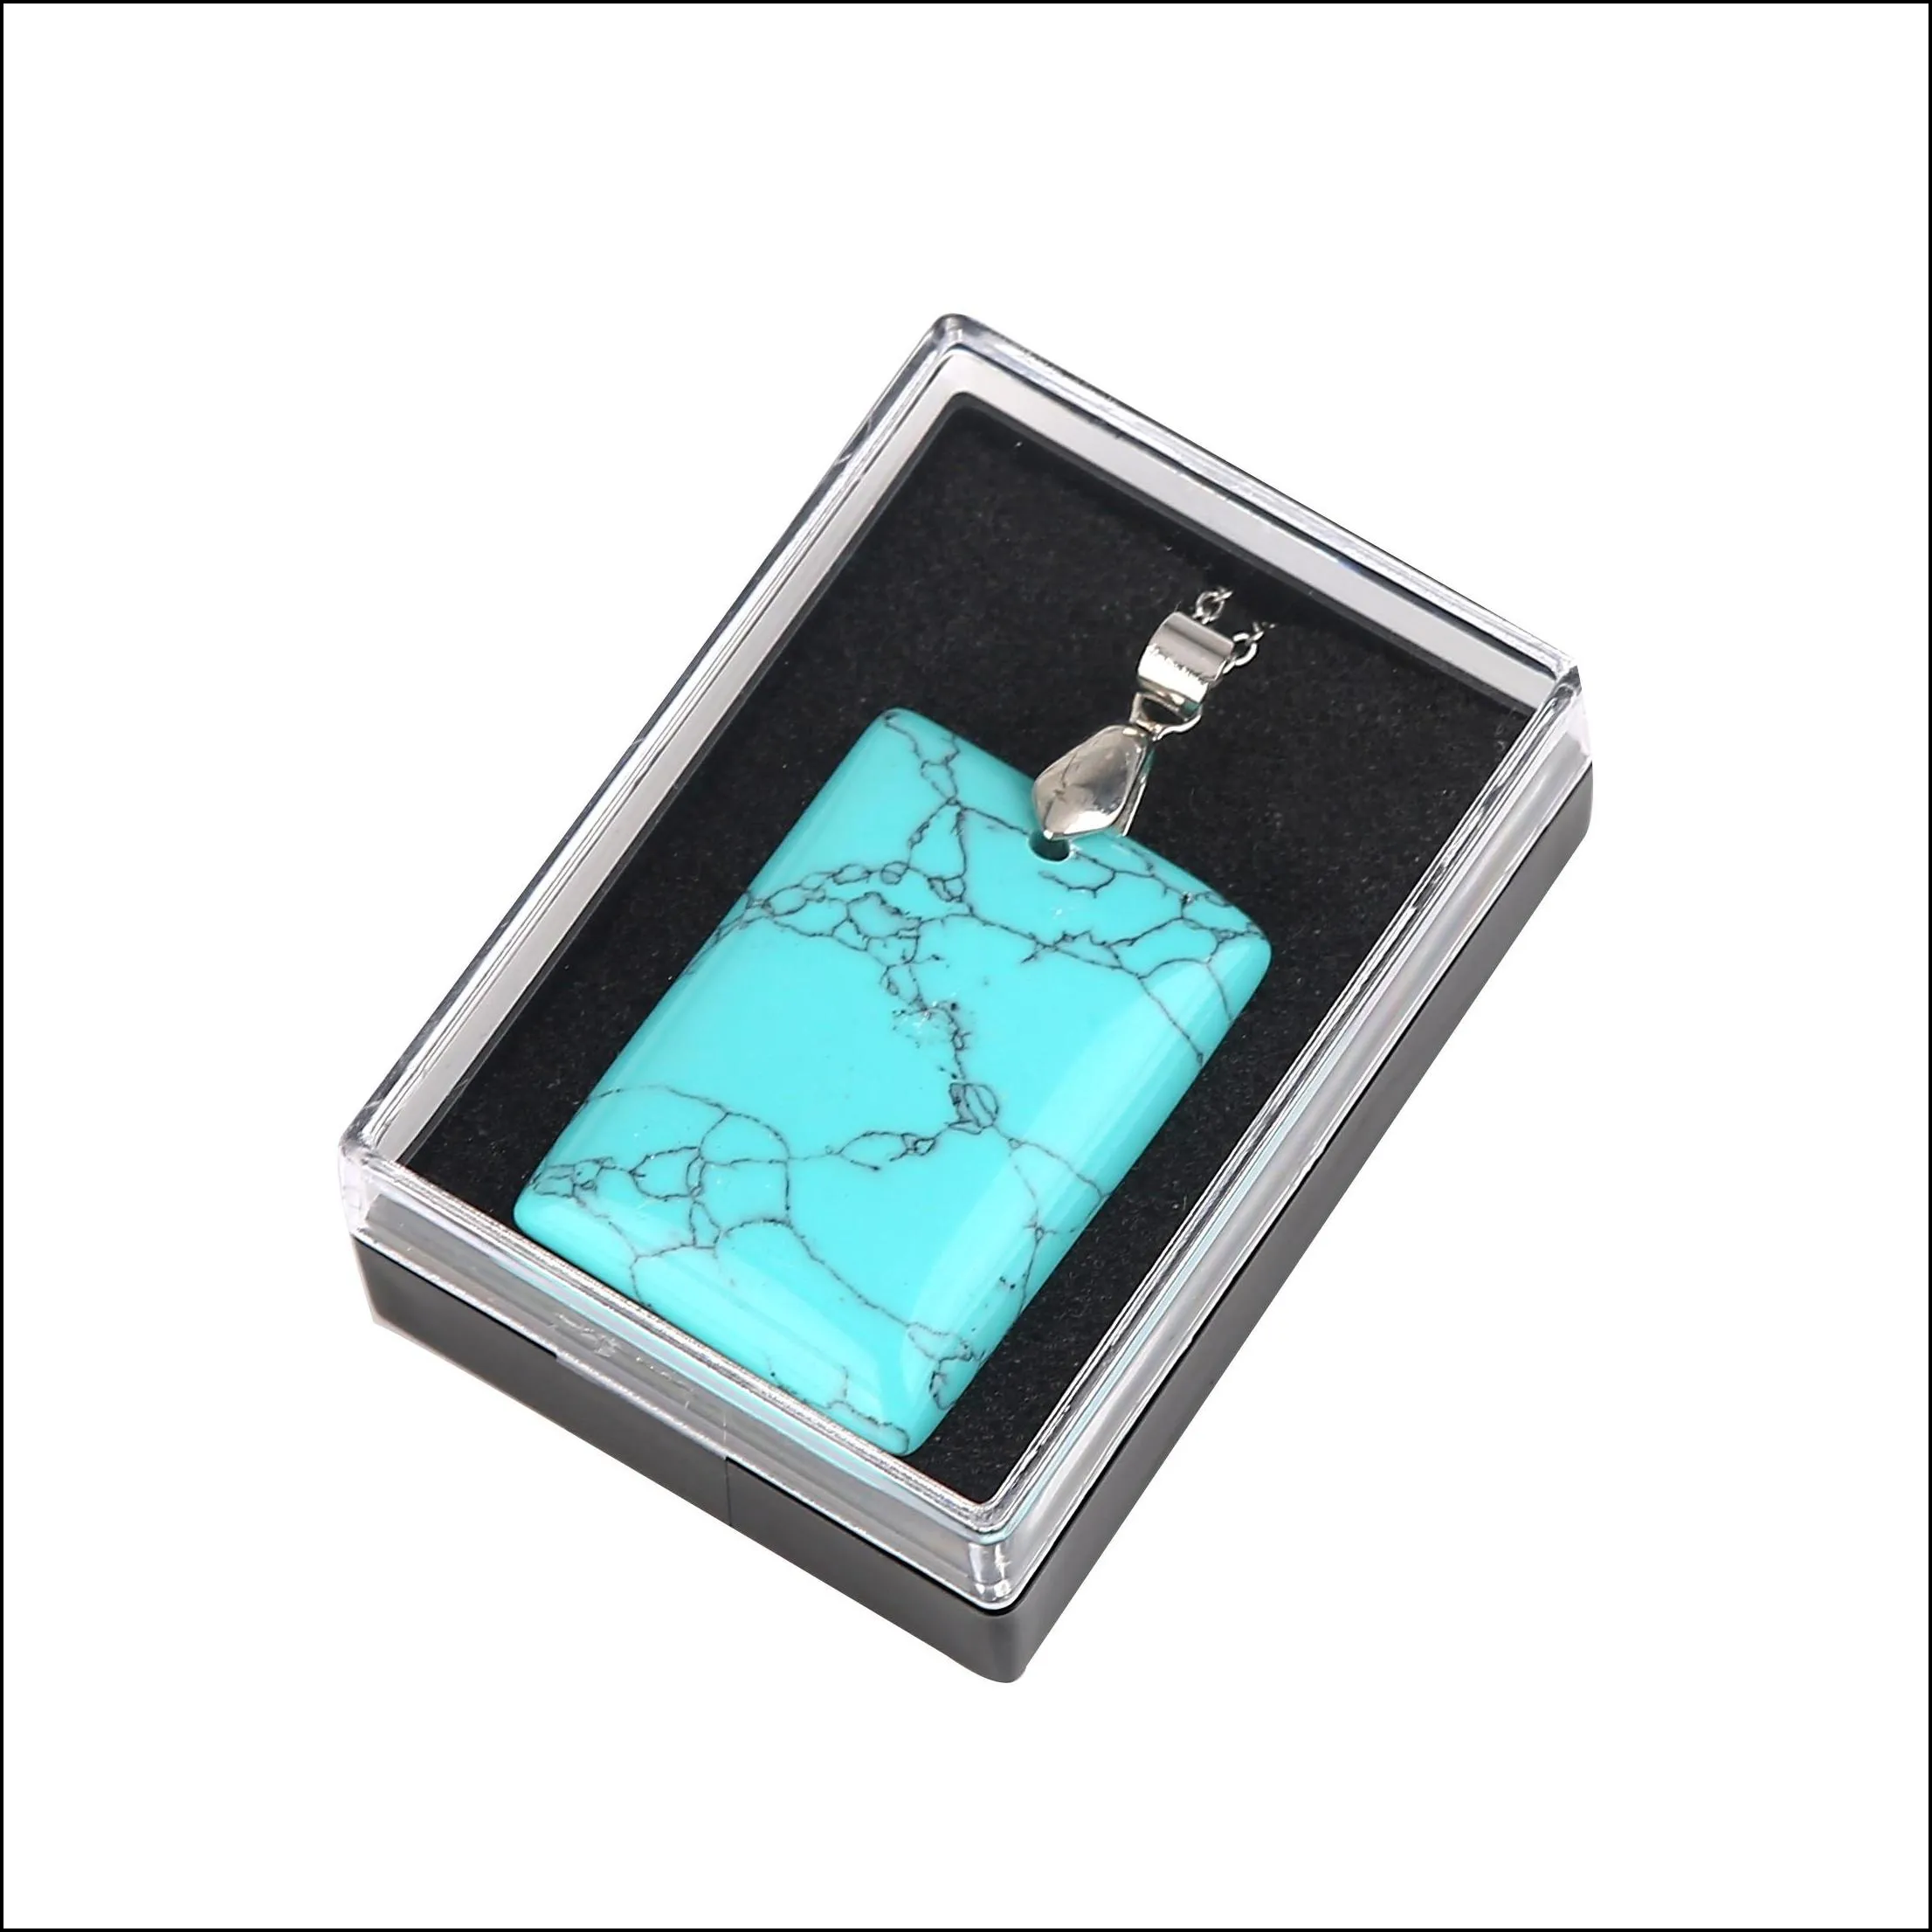 12 pieces rectangular pendant men and women mixed necklace stainless steel gift box packaging jewelry set